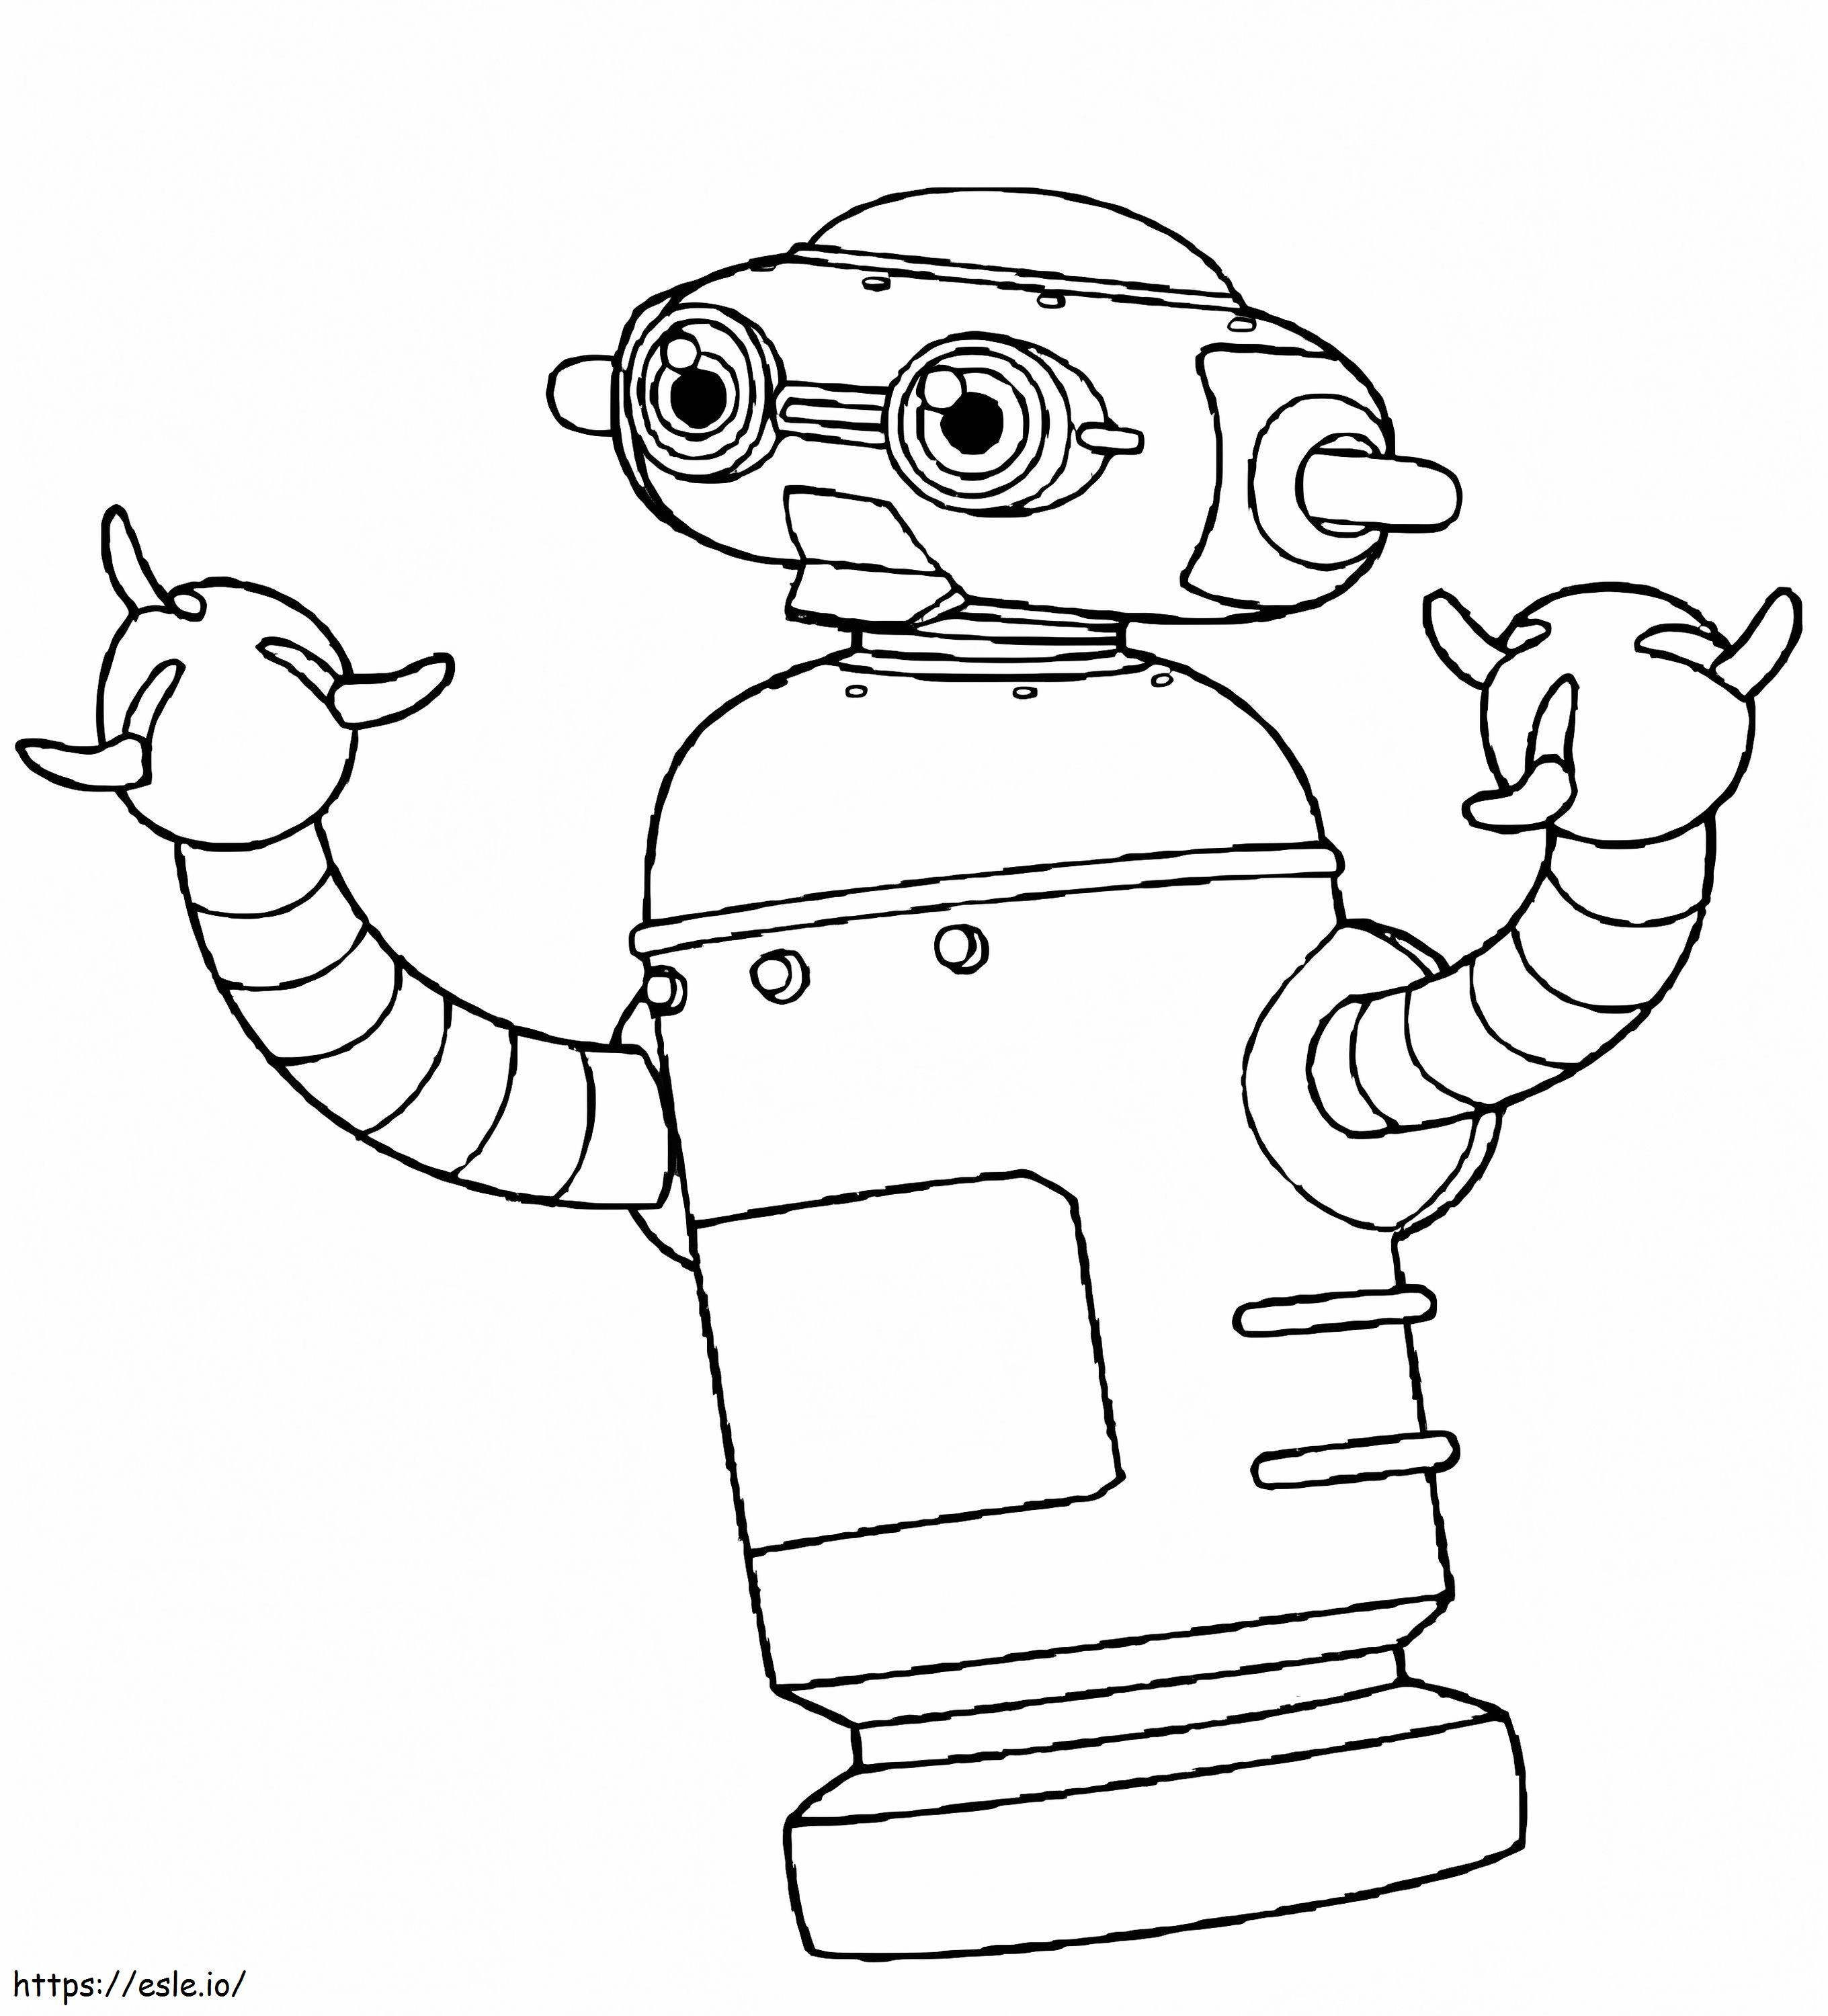 Chicken Robot coloring page